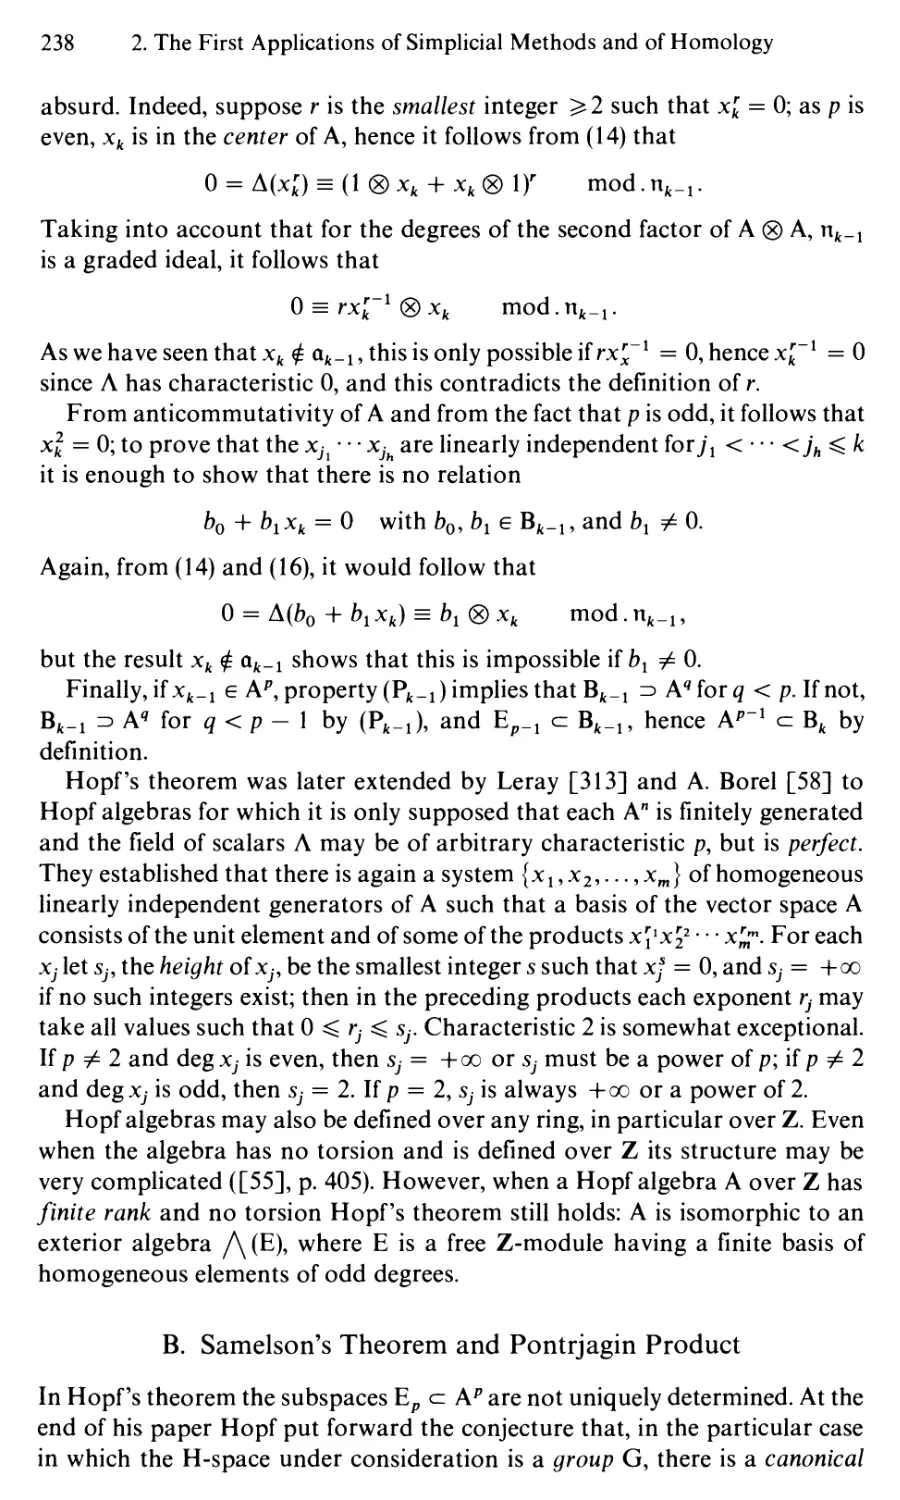 B. Samelson's Theorem and Pontrjagin Product